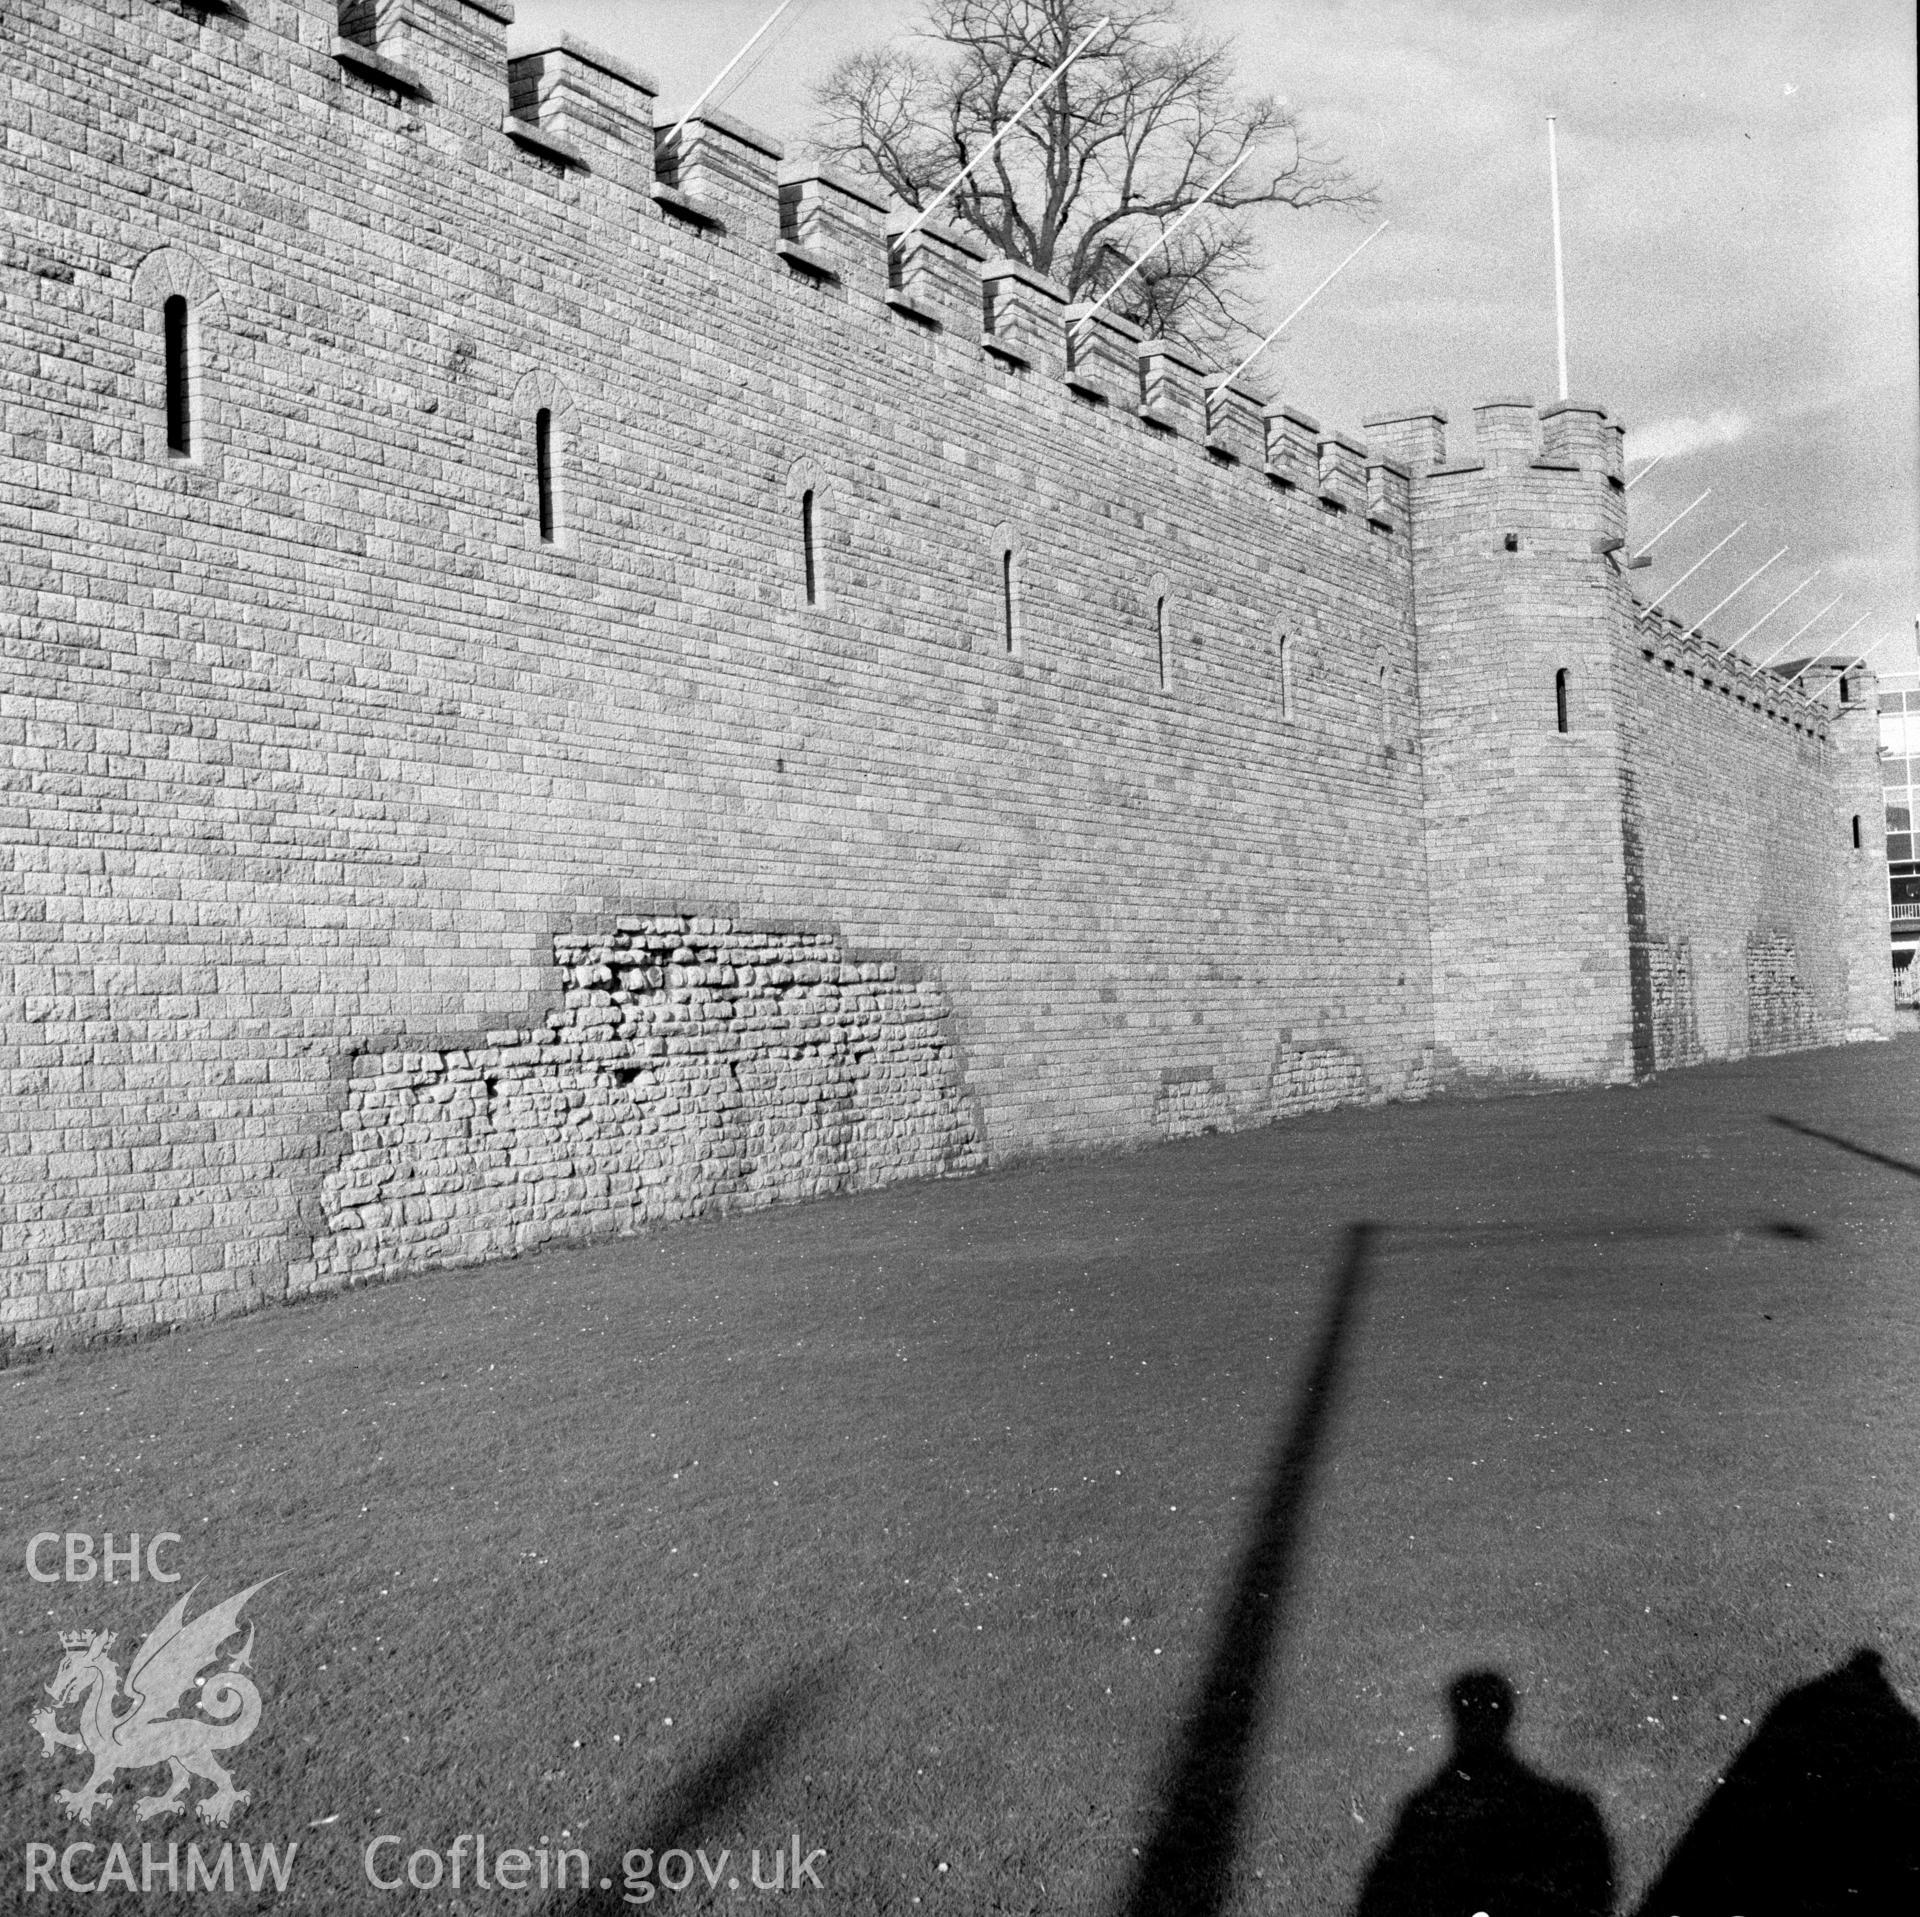 Digital copy of a black and white negative showing west wall of Cardiff Castle, dated 21st February 1966.